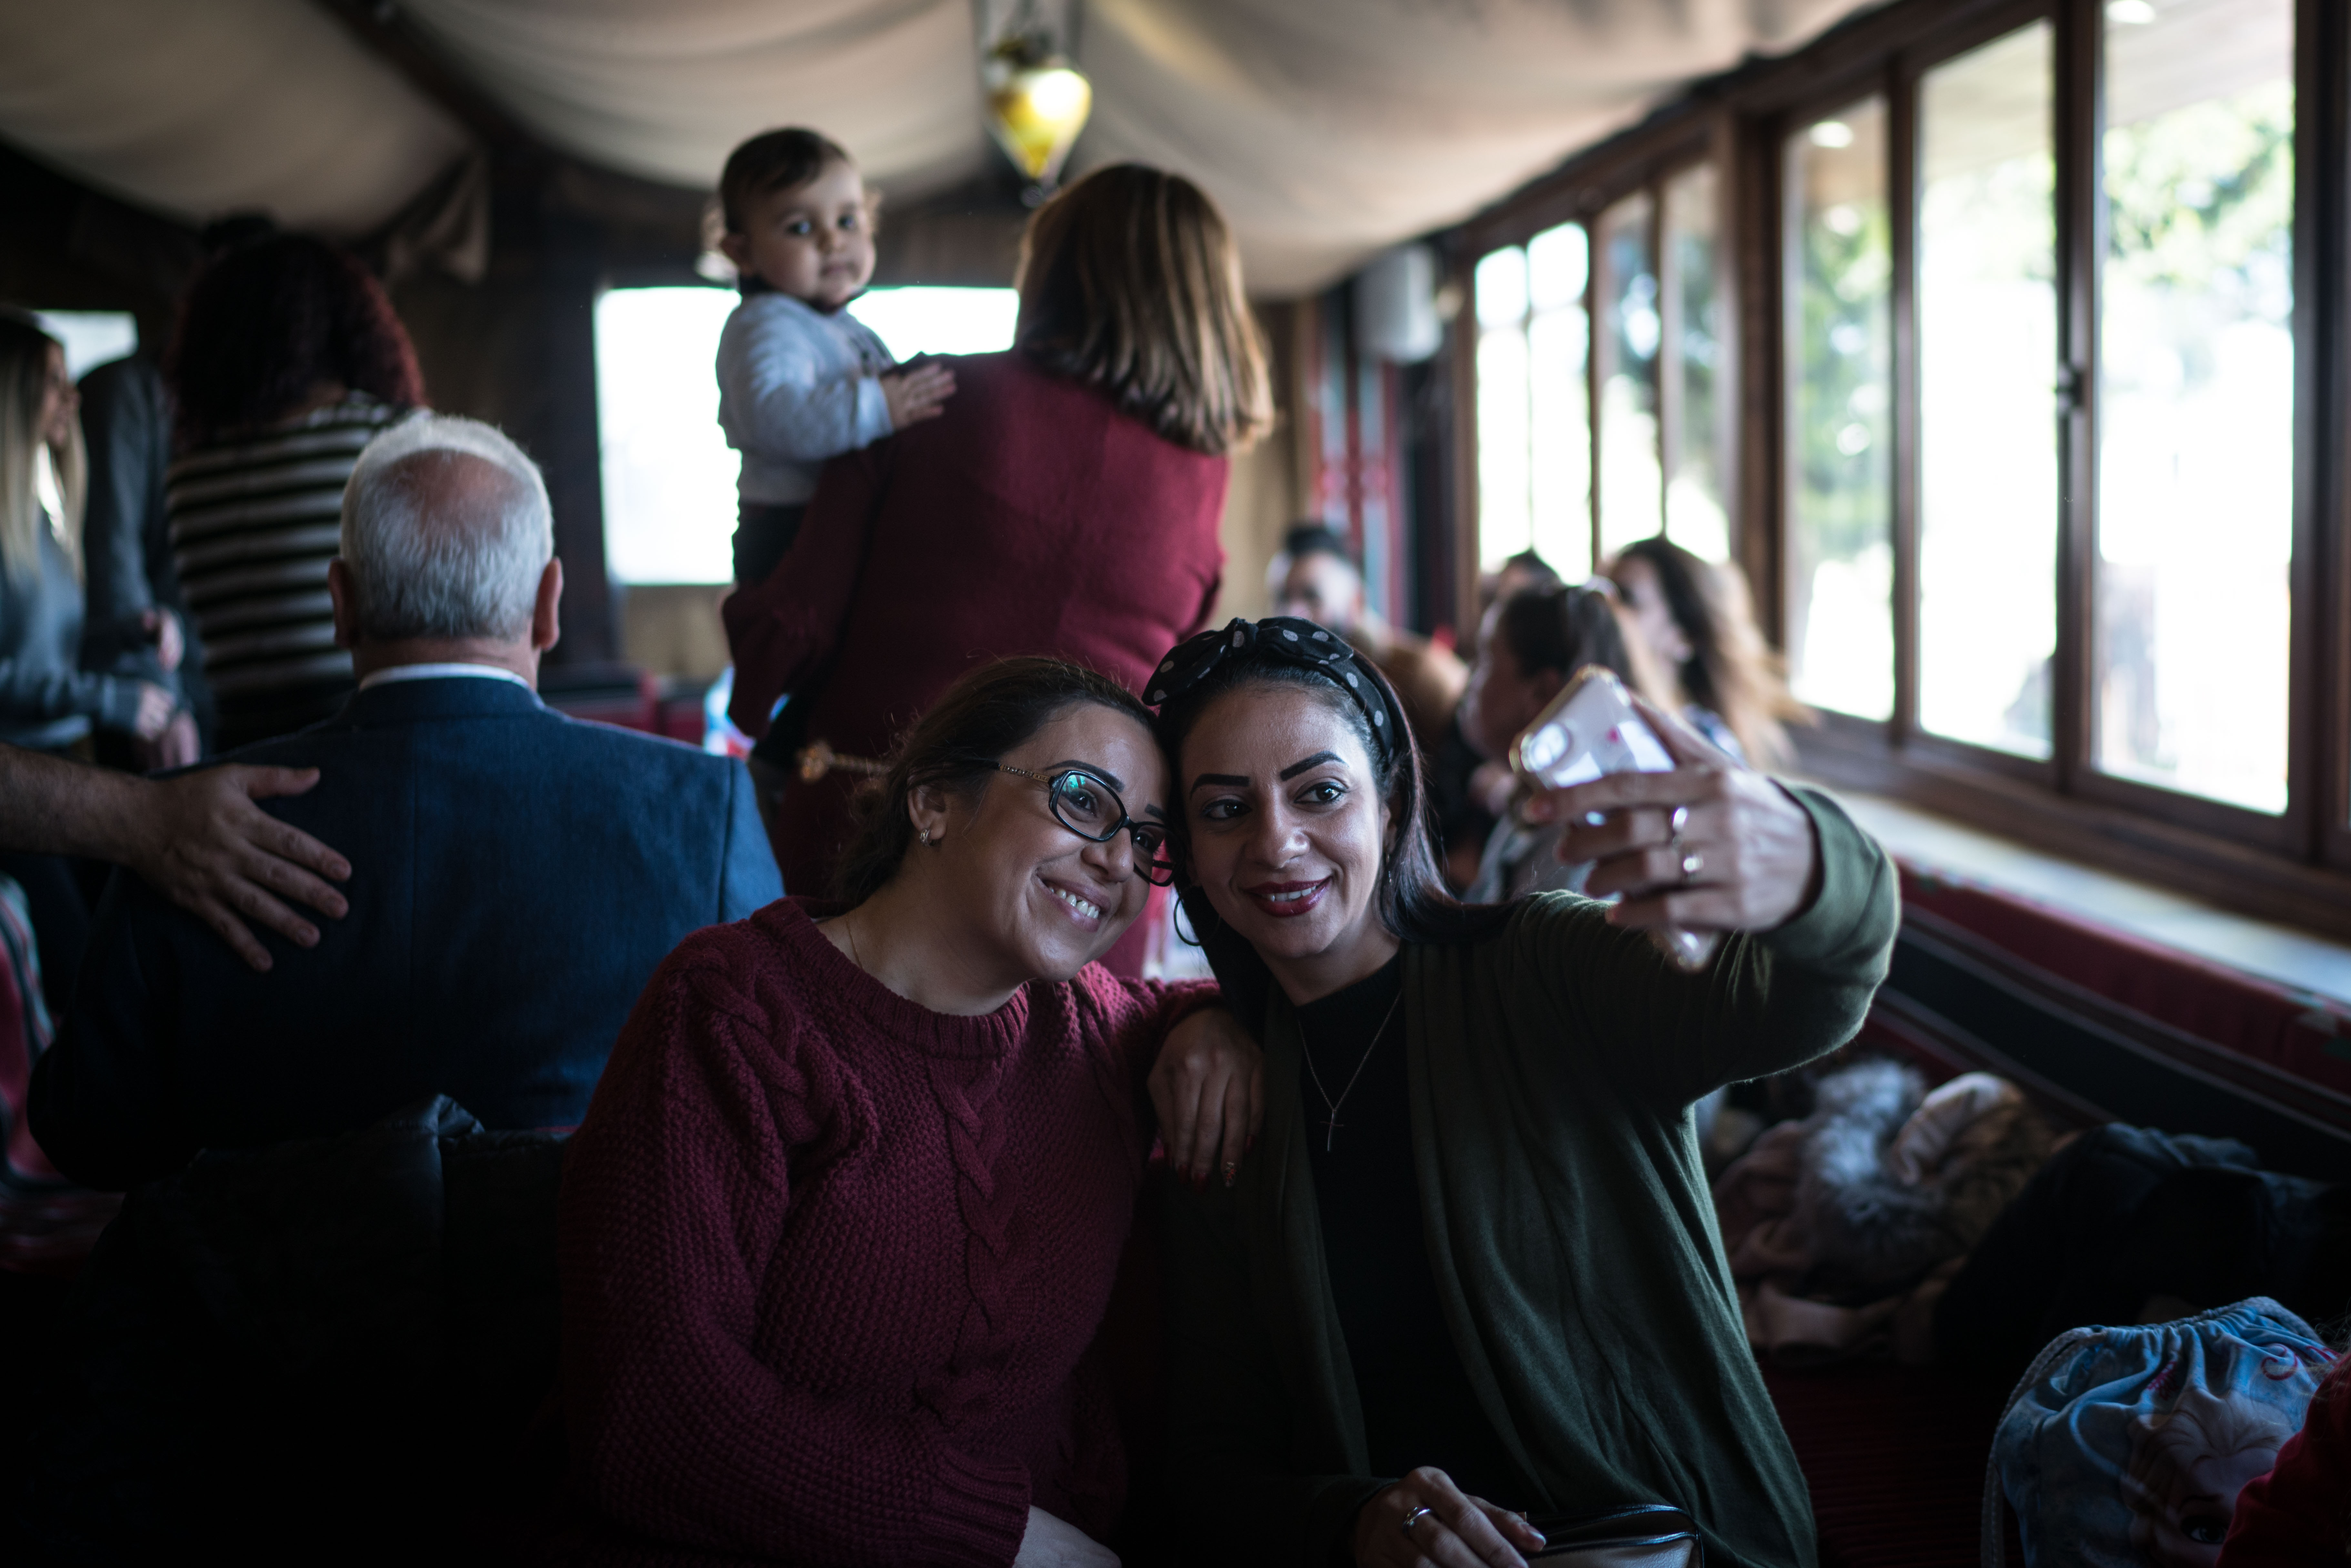 Nisreen Antone takes a selfie with her sister whom she hadn't seen for three years, during their Christmas lunch in Bethlehem on December 25, 2018.